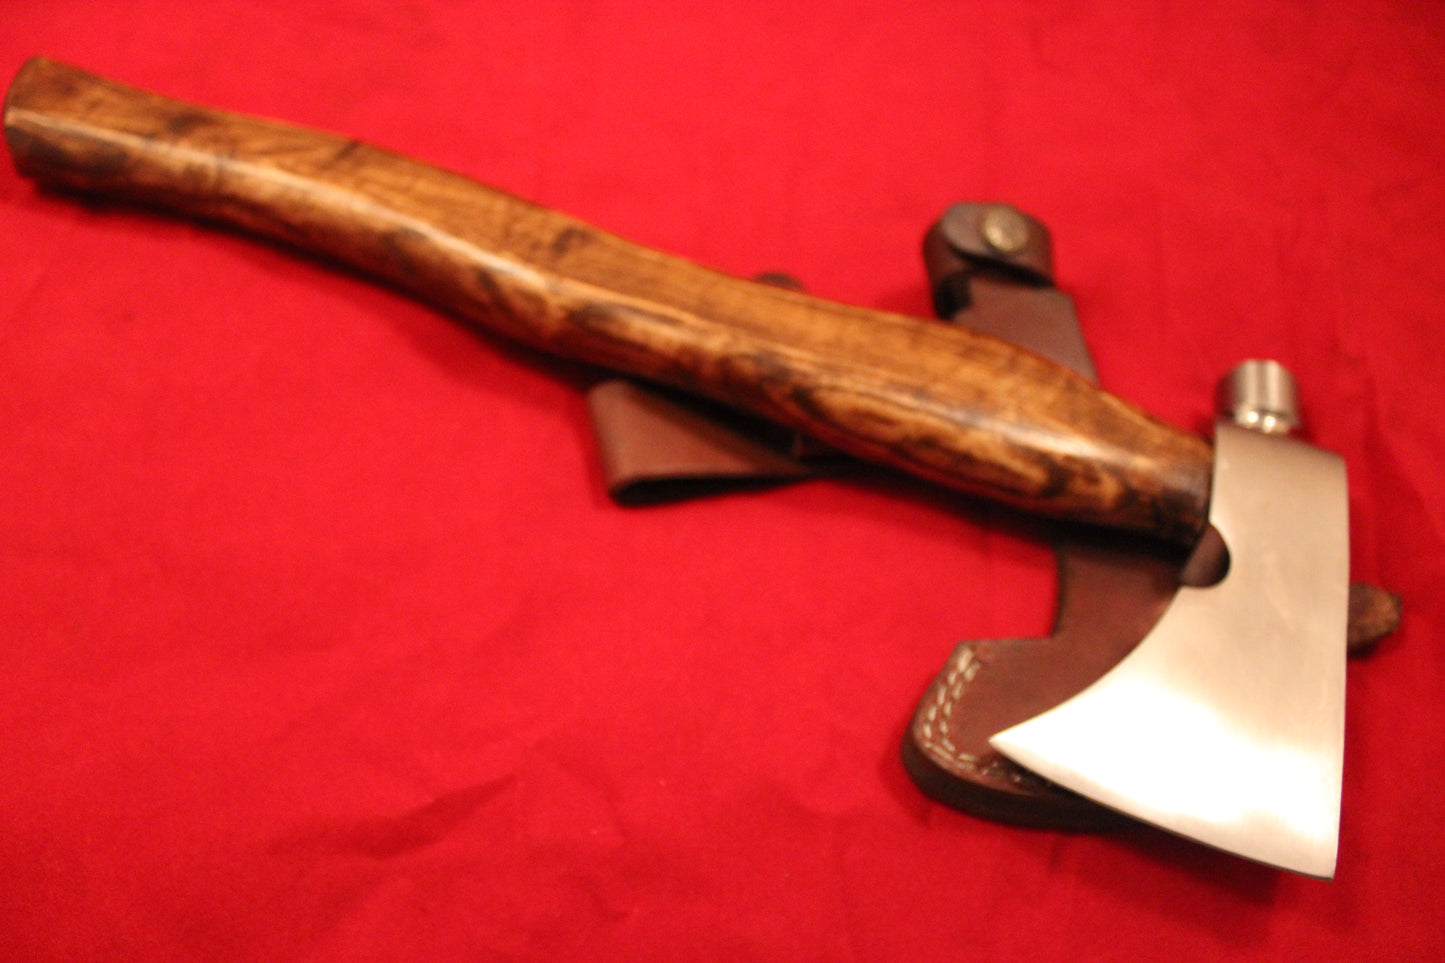 Hand Forged 5160 Steel Hammer Axe - Durable and Versatile Tactical Axe for Any Adventure